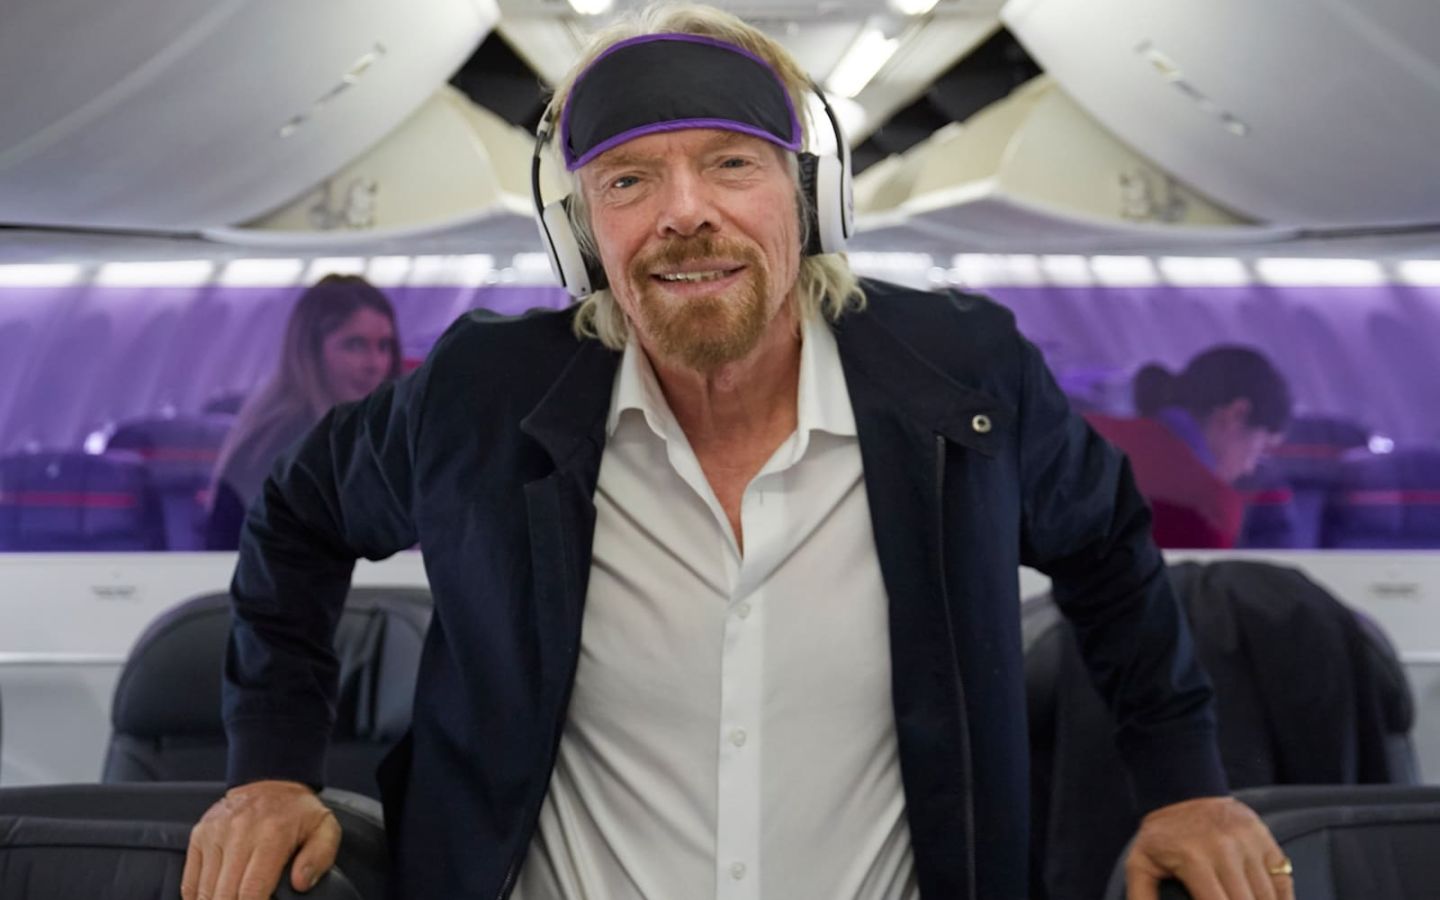 Richard Branson standing in the aisle of a plane wearing headphones